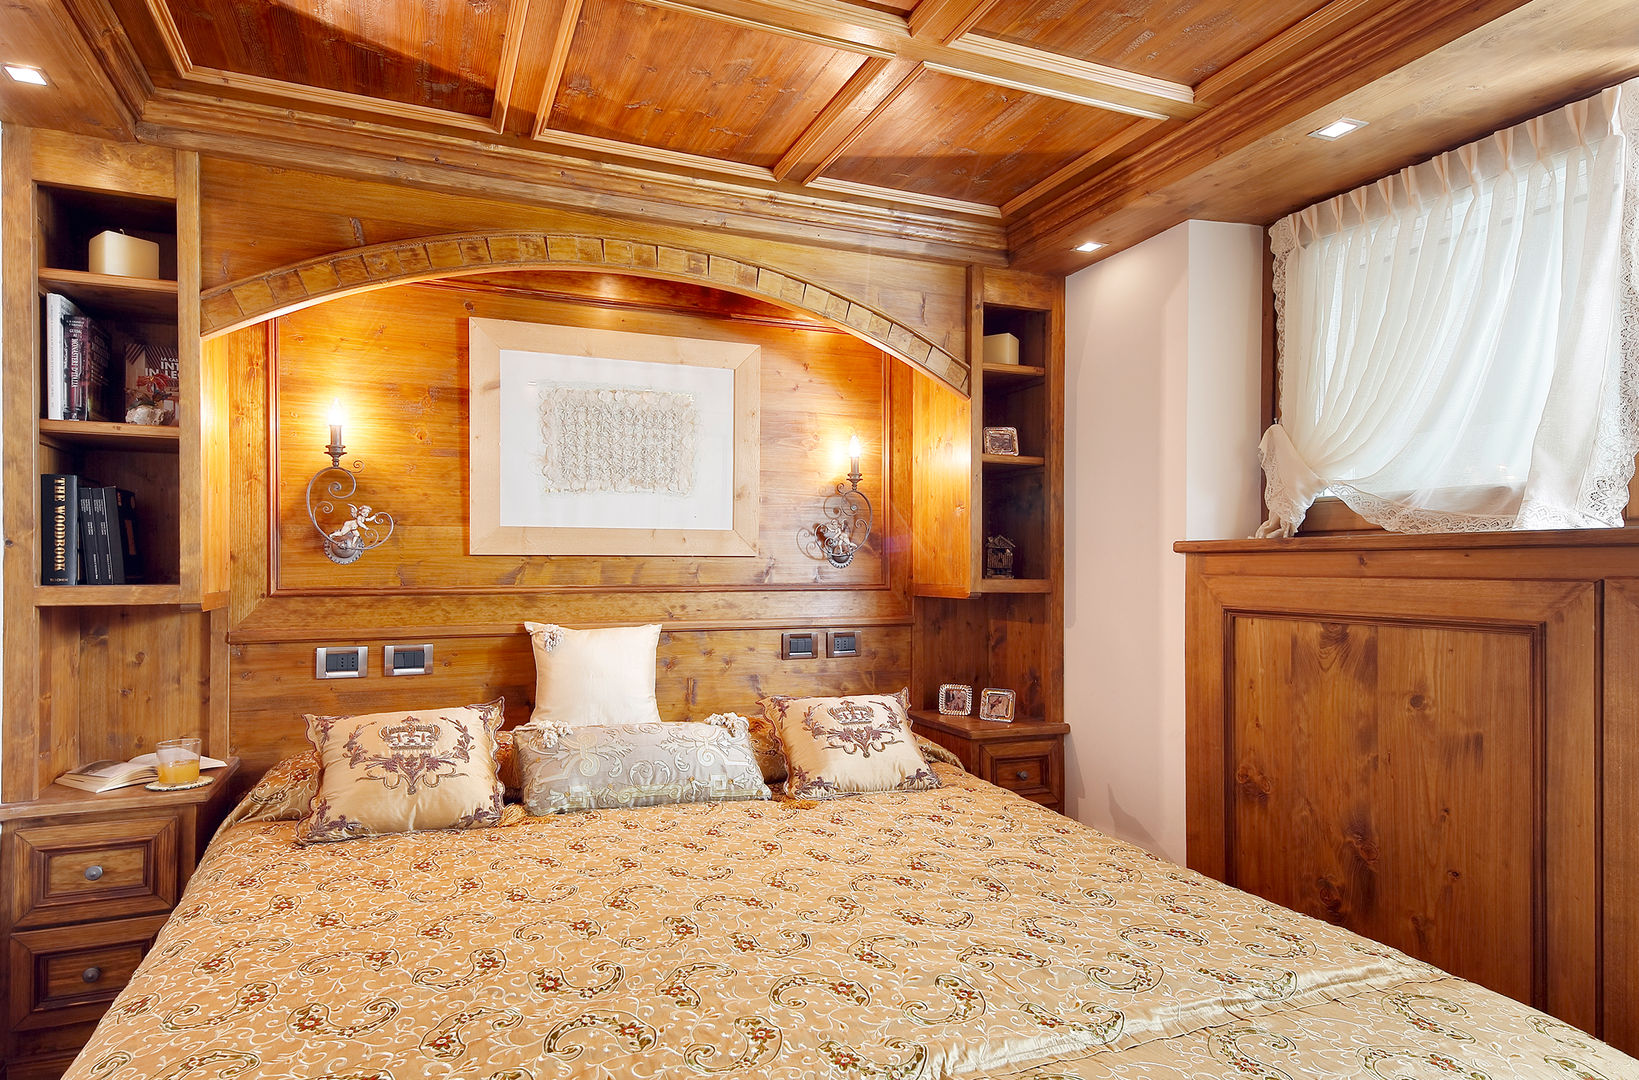 A tipical house with rock inside in Cortina d'Ampezzo, Ambra Piccin Architetto Ambra Piccin Architetto Rustic style bathroom Wood Wood effect Beds & headboards